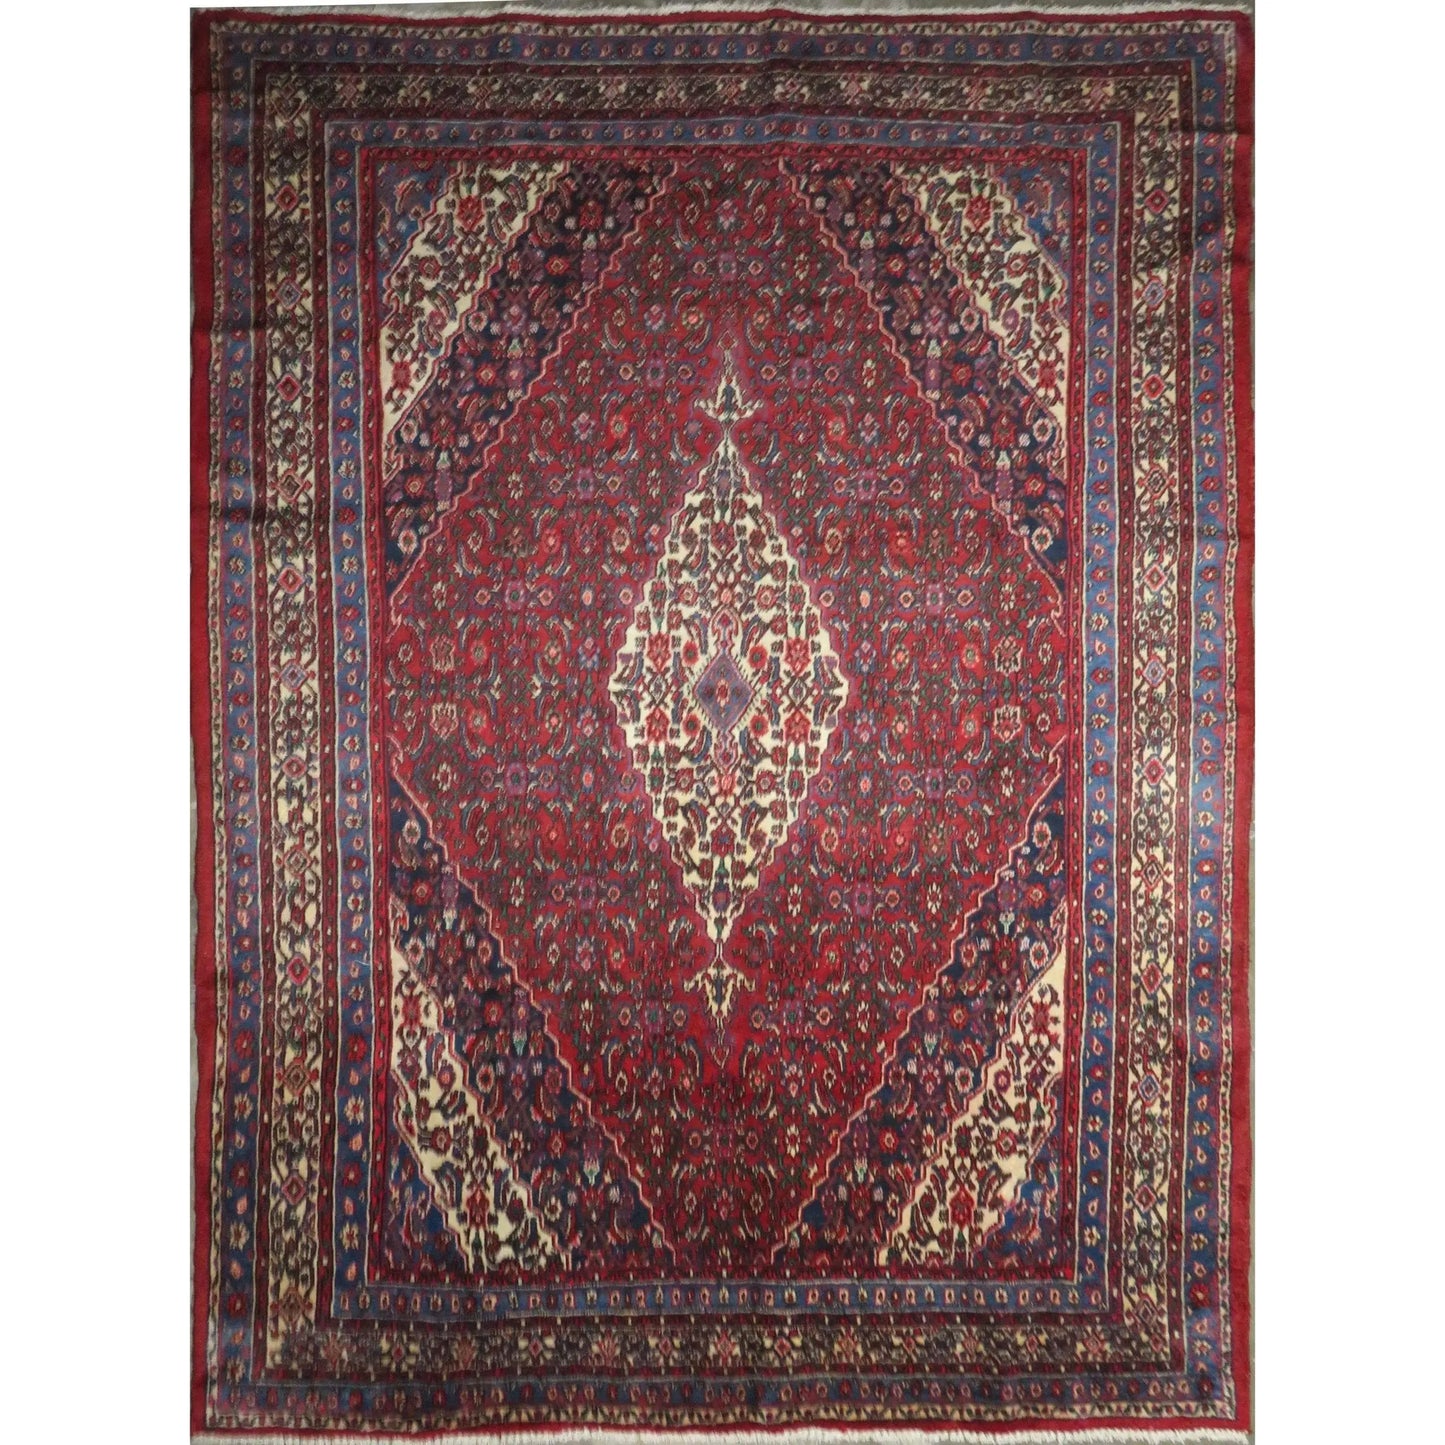 Hand-Knotted Vintage Rug 11'7" x 8'1"